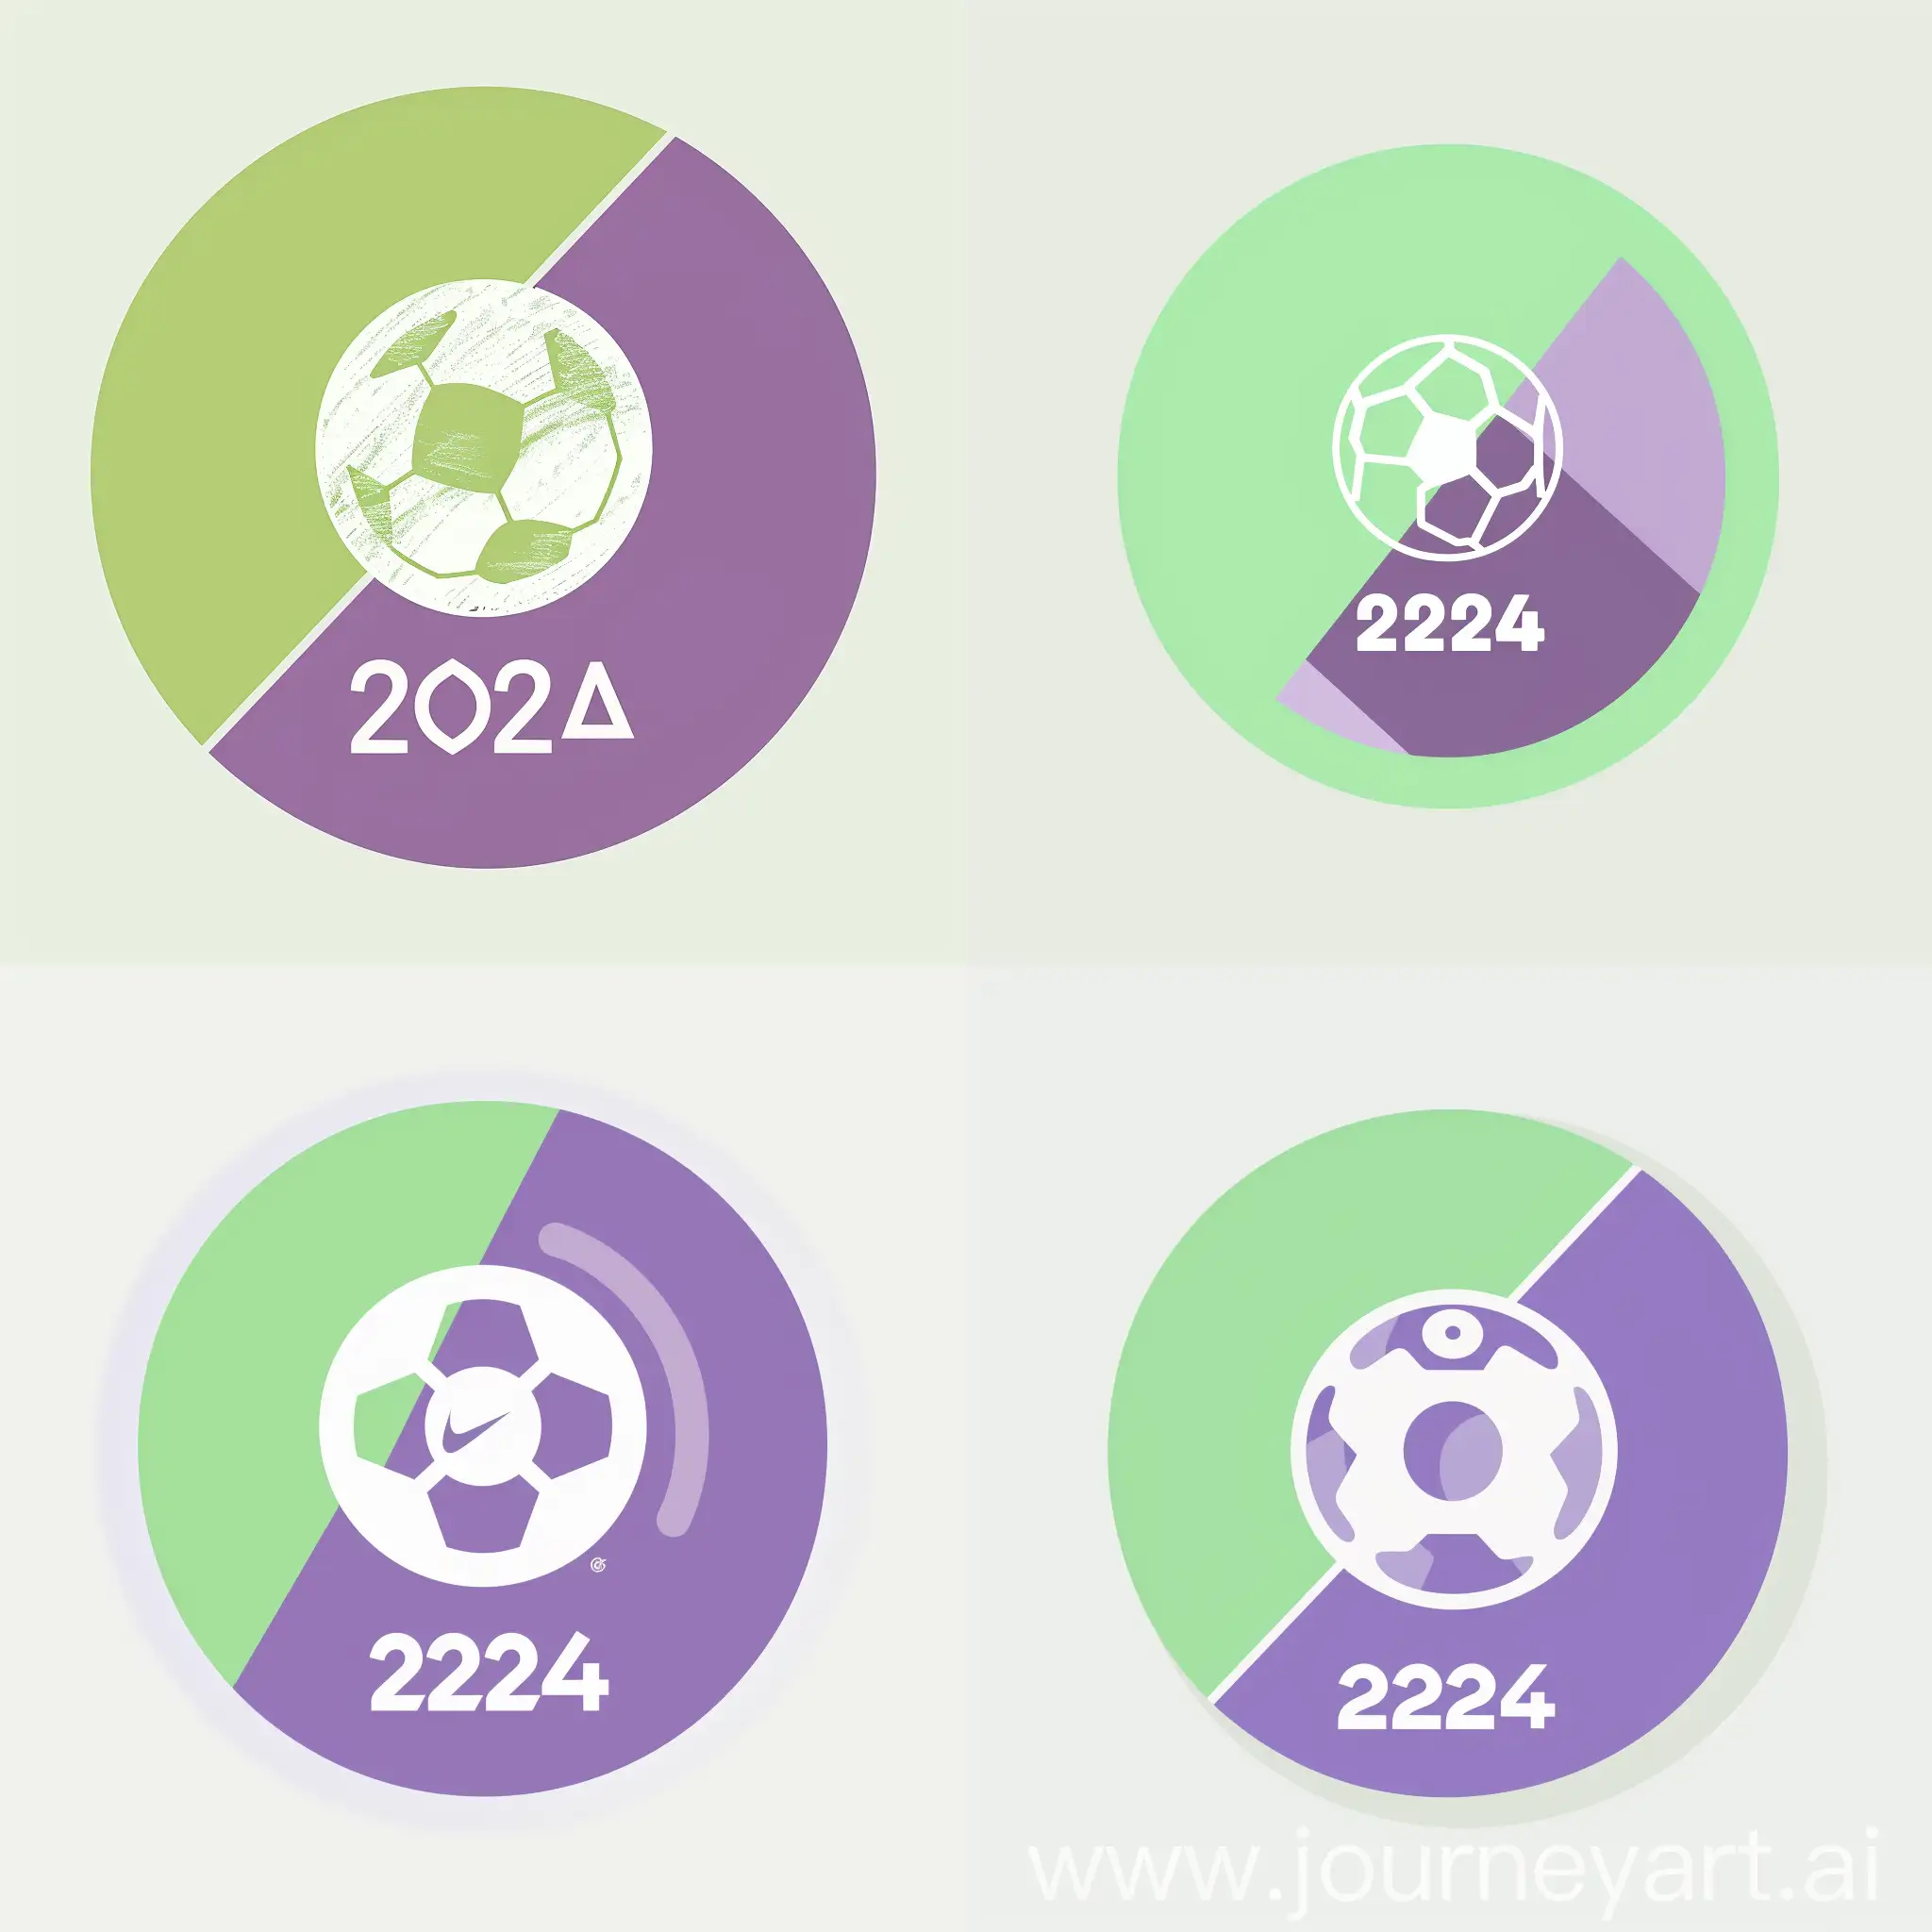 Please draw a circular logo that is divided into two equal halves by a diagonal line. The top left half should be light green and the bottom right half should be purple. In the middle of the purple half, place a white soccer ball icon. Below the soccer ball icon, write ‘2024’ in white text.